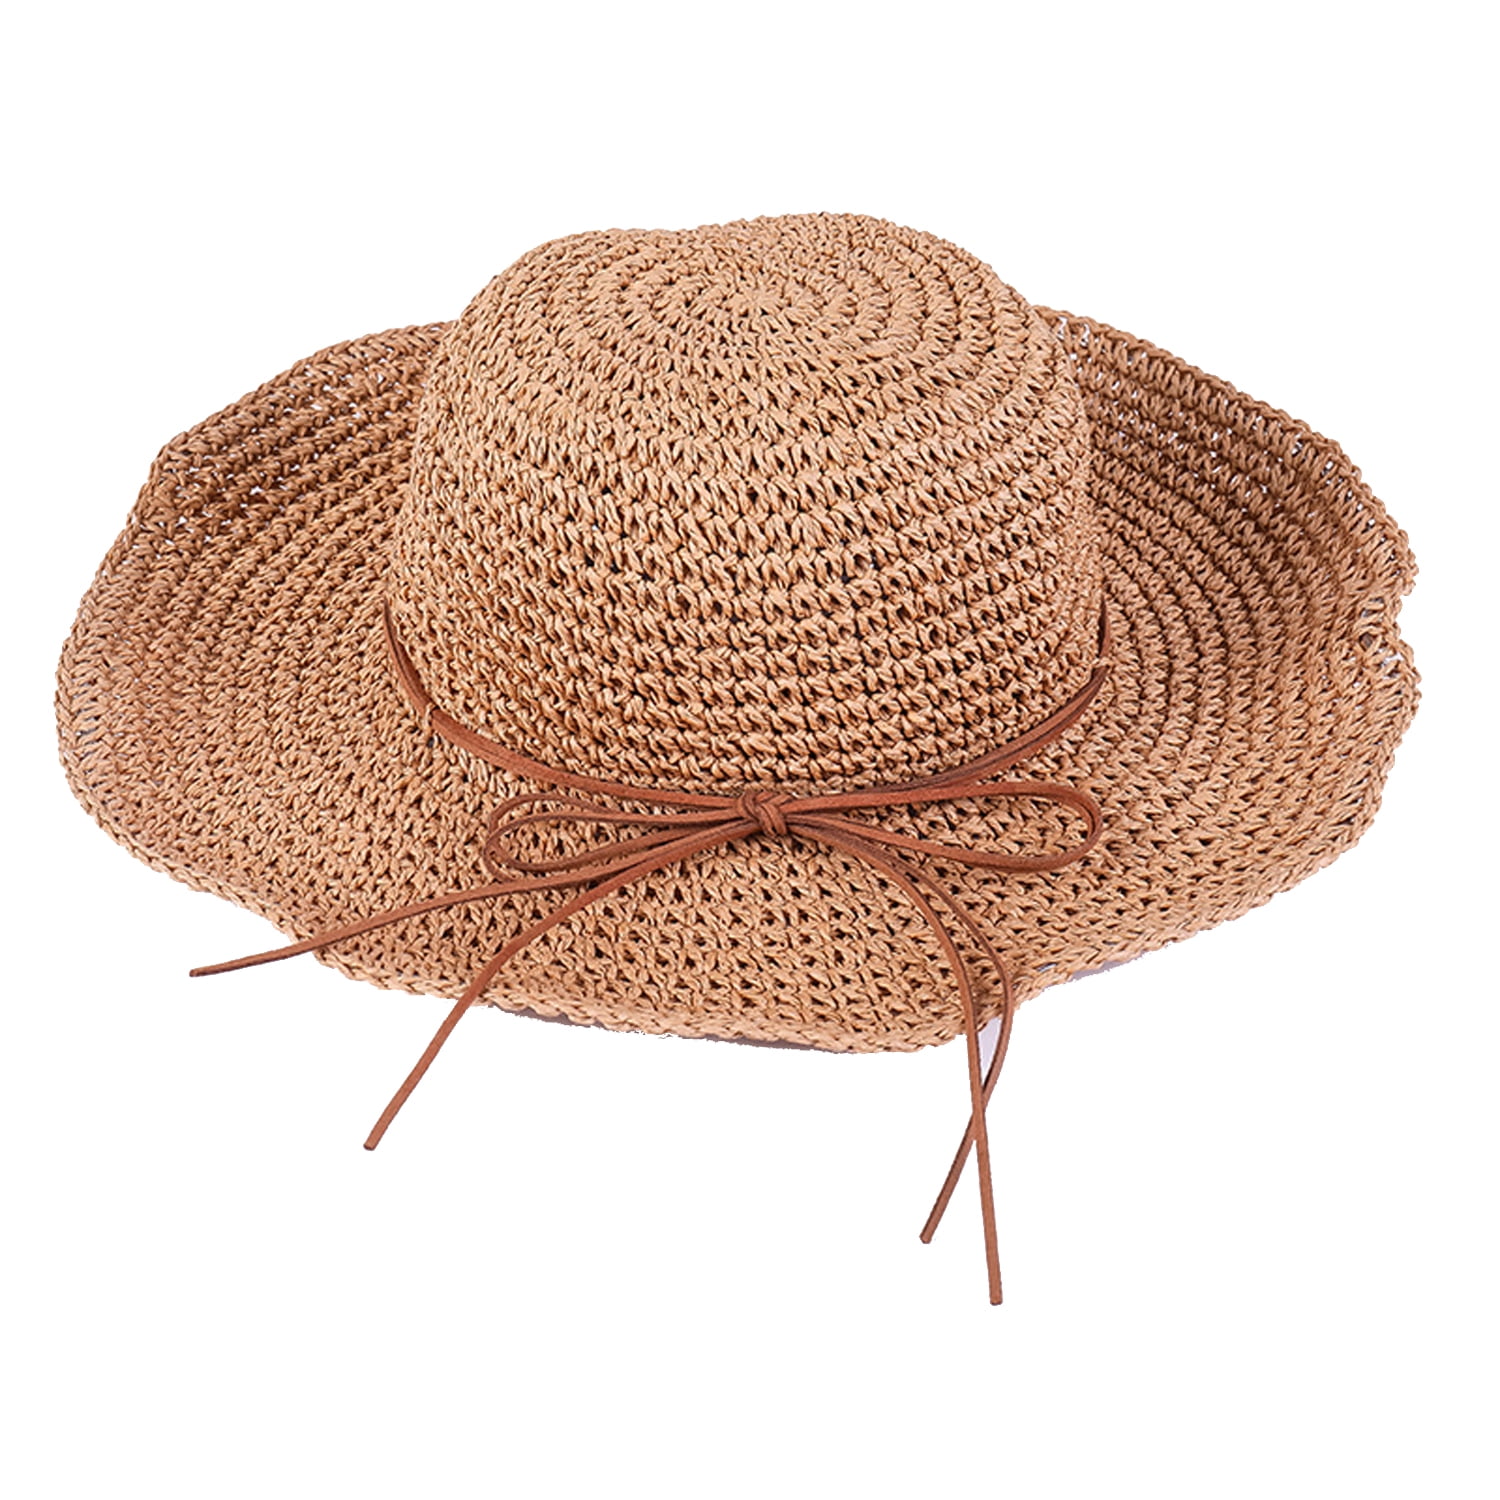 Sun Hats for Women UV Protection Wide Brim UPF 50 Foldable Straw